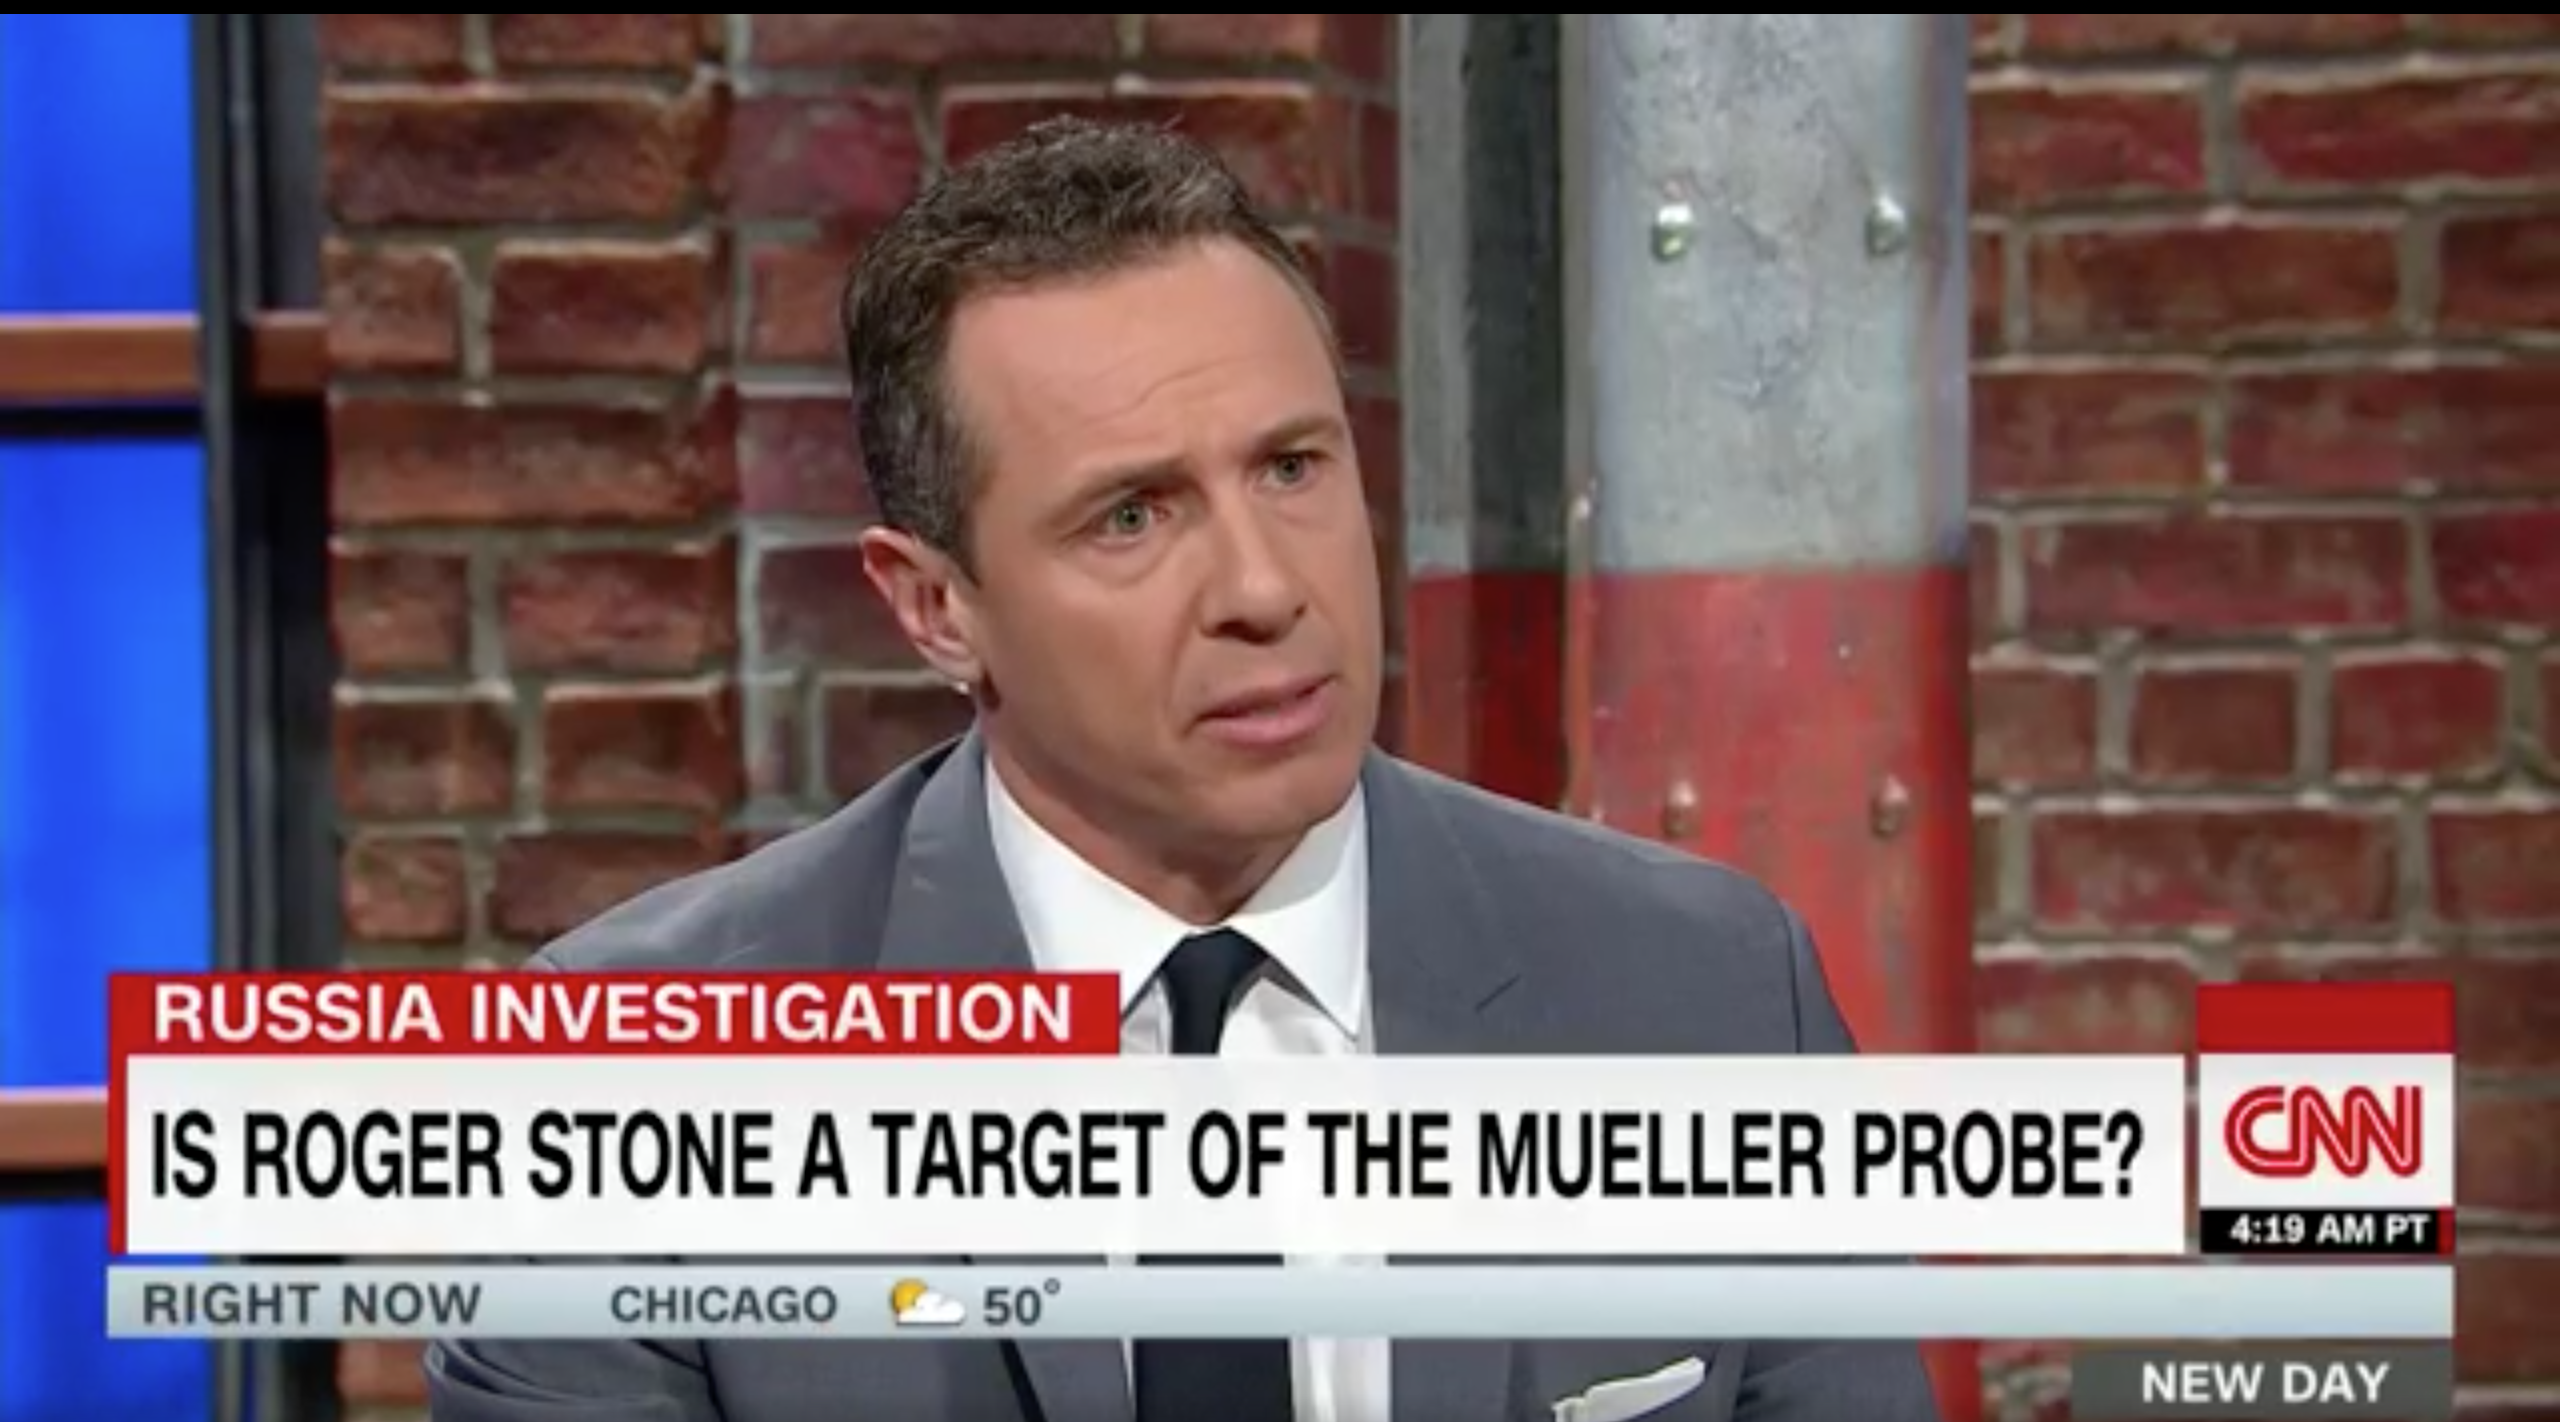 Chris Cuomo and Roger Stone.